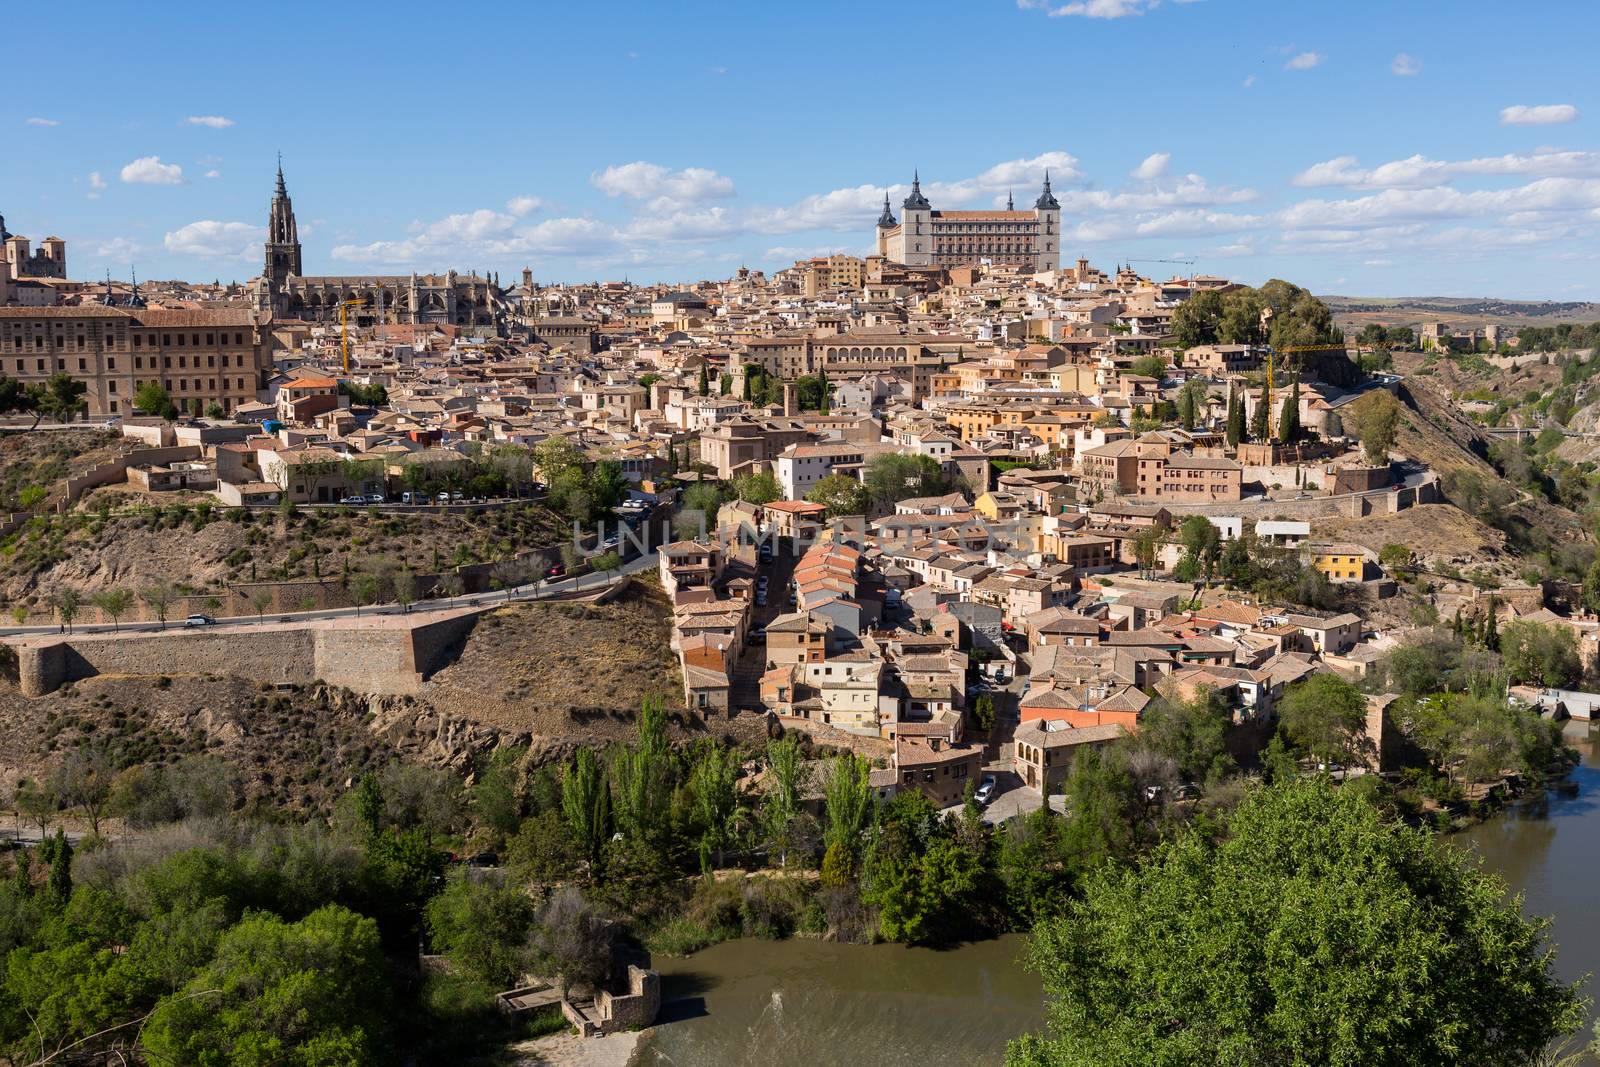 View of Toledo from the Mirador del Valle, Spain